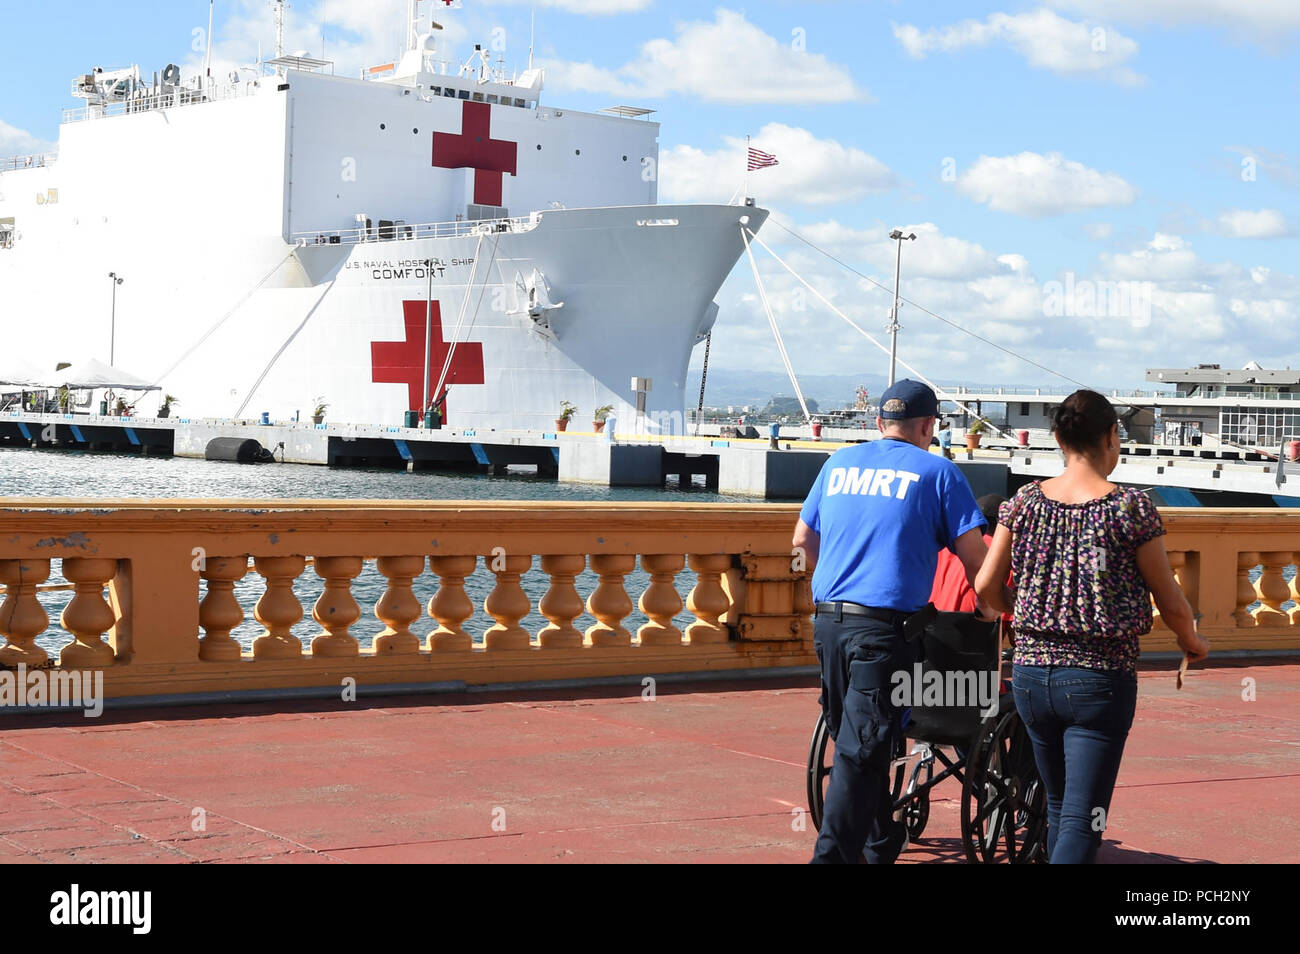 SAN JUAN, Puerto Rico (Nov. 1, 2017) A patient is escorted to the U.S. Department of Health and Human Services medical tent on the pier as the Military Sealift Command hospital ship USNS Comfort (T- AH 20) is moored pierside in San Juan to provide humanitarian relief. The Department of Defense is supporting the Federal Emergency Management Agency, the lead federal agency, in helping those affected by Hurricane Maria to minimize suffering and is one component of the overall whole-of-government response effort. Stock Photo